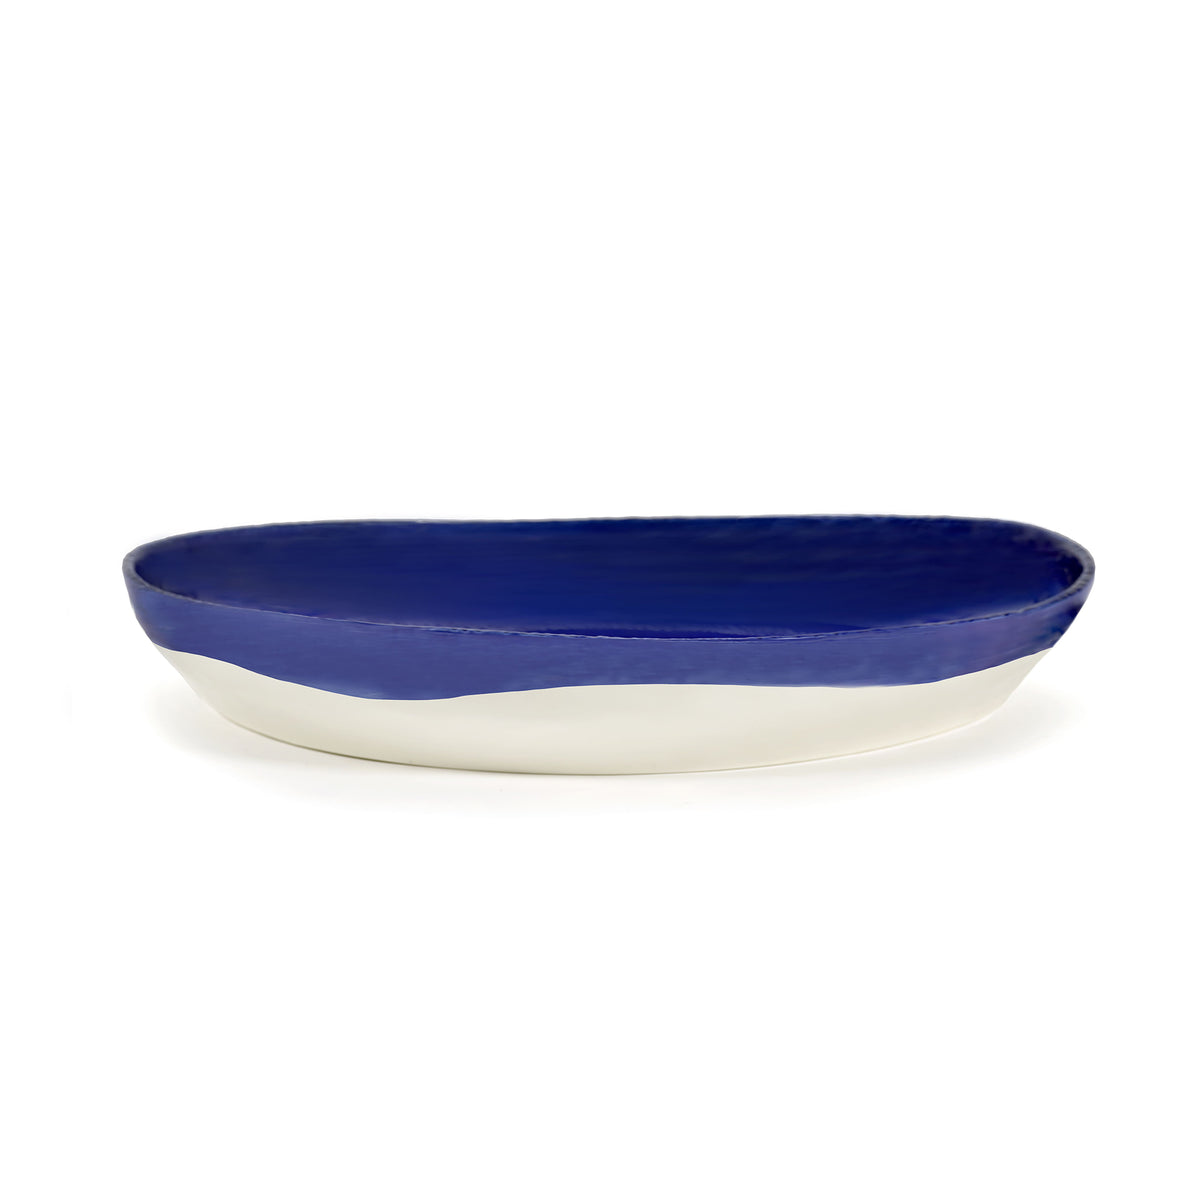 Lapis Lazuli High Side Serving Plate with White Dots